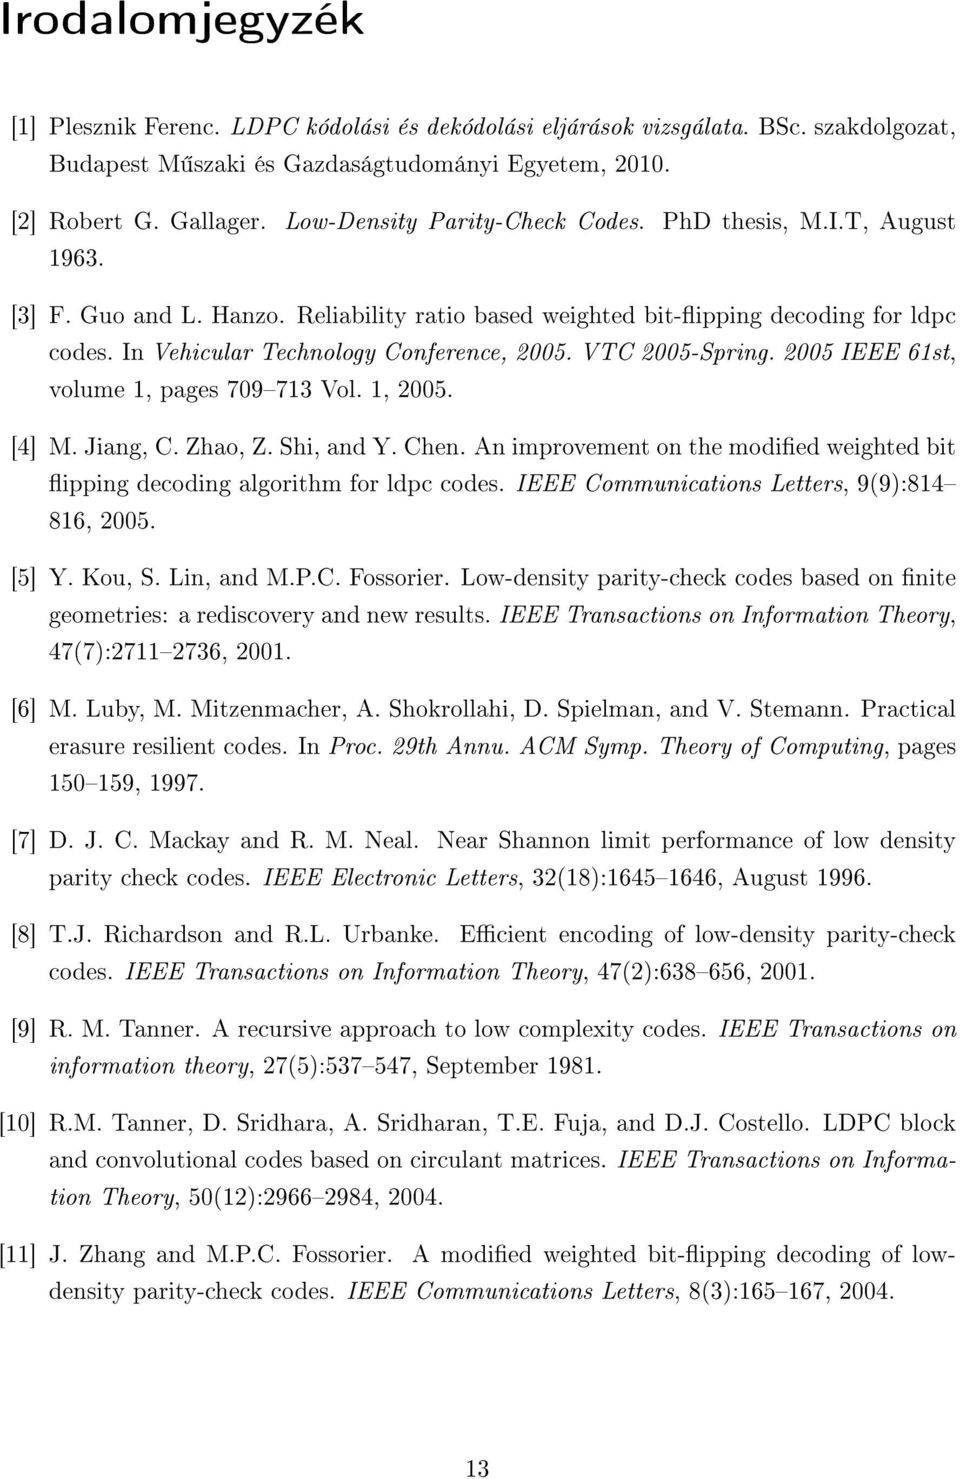 VTC 2005-Spring. 2005 IEEE 61st, volume 1, pages 709713 Vol. 1, 2005. [4] M. Jiang, C. Zhao, Z. Shi, and Y. Chen. An improvement on the modied weighted bit ipping decoding algorithm for ldpc codes.